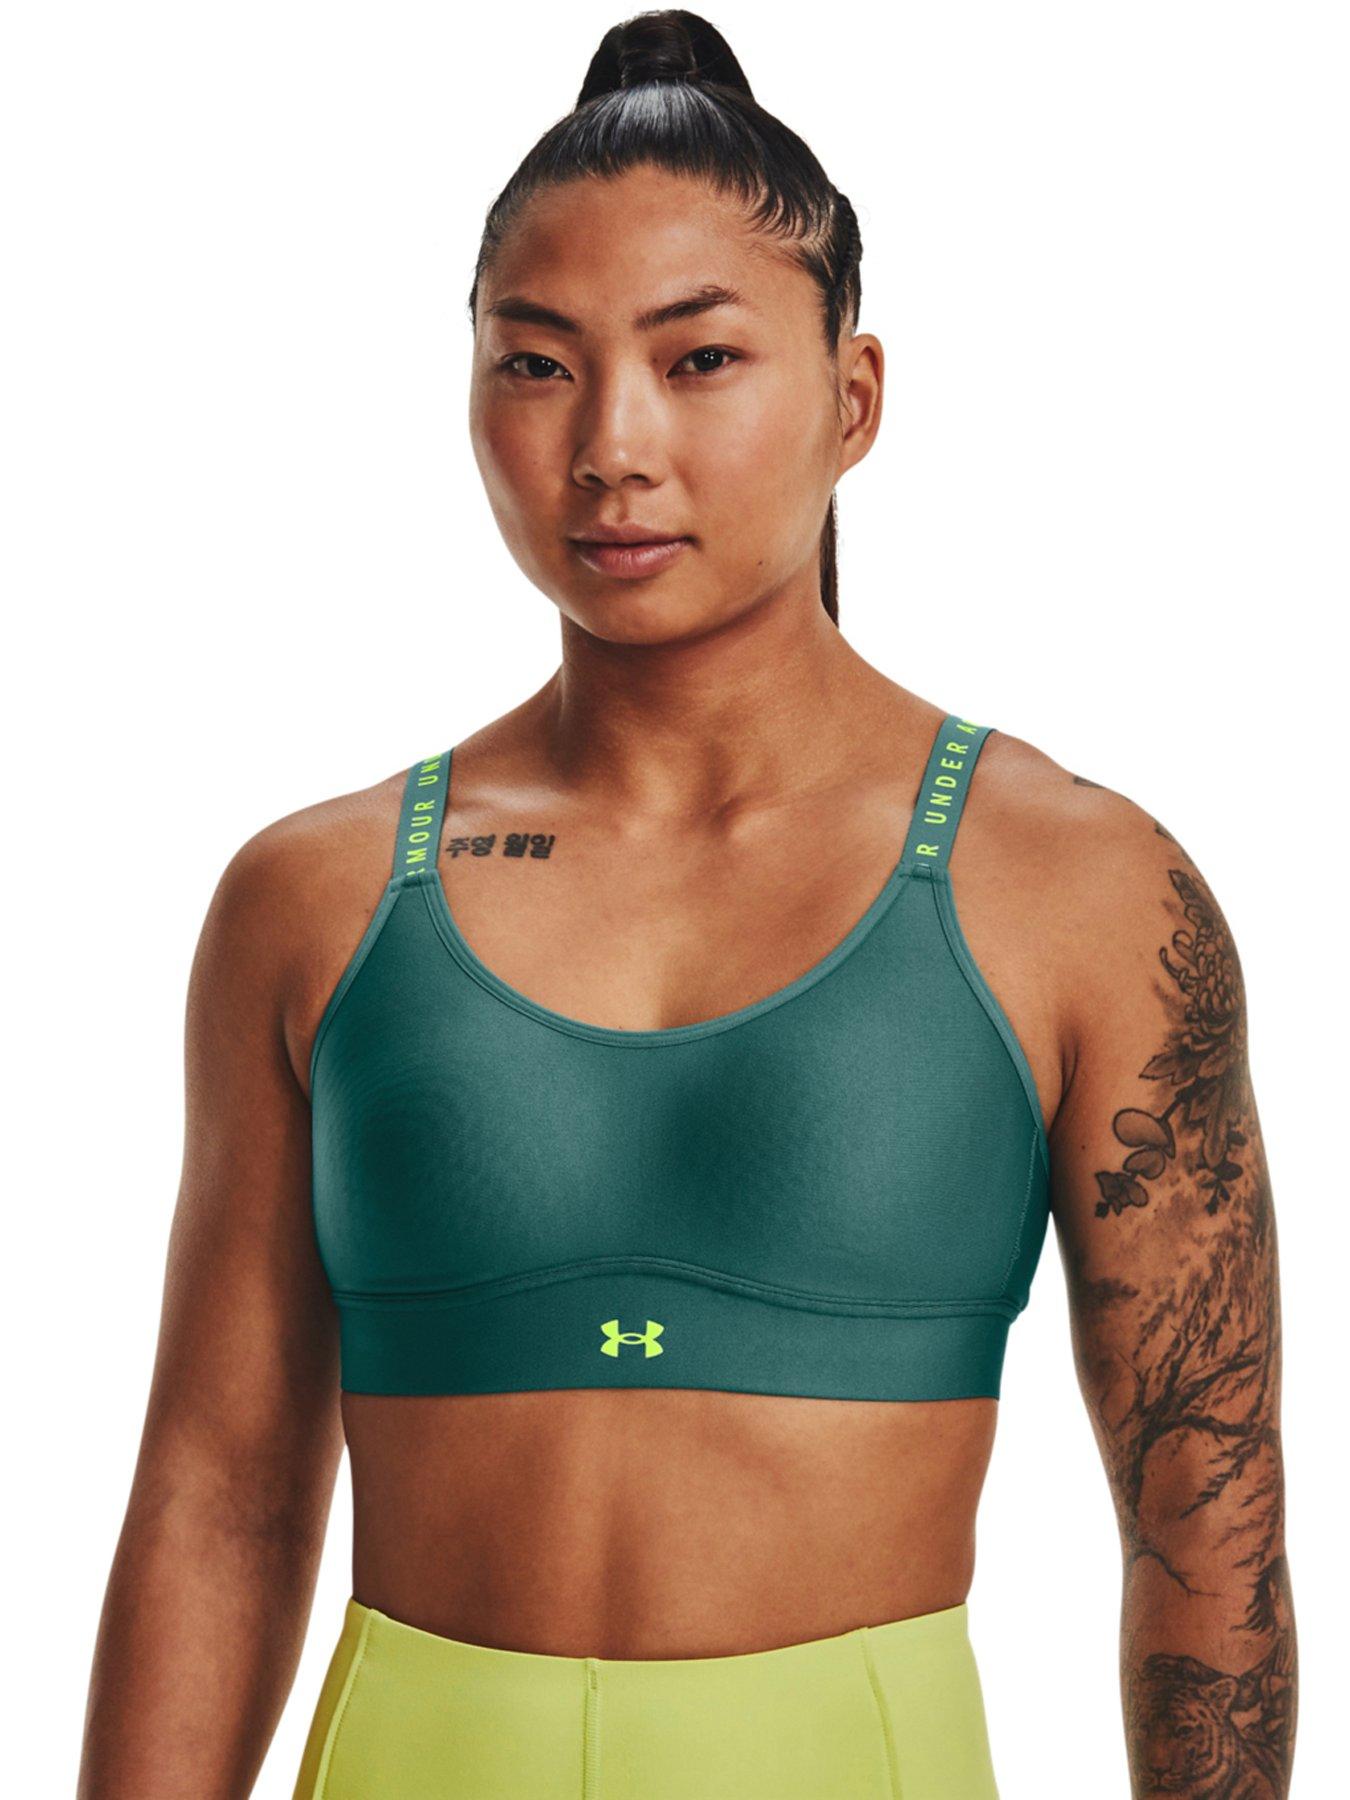  Under Armour Women's Infinity High Impact Sports Bra, (001)  Black / / White, X-Small D-DD : Clothing, Shoes & Jewelry